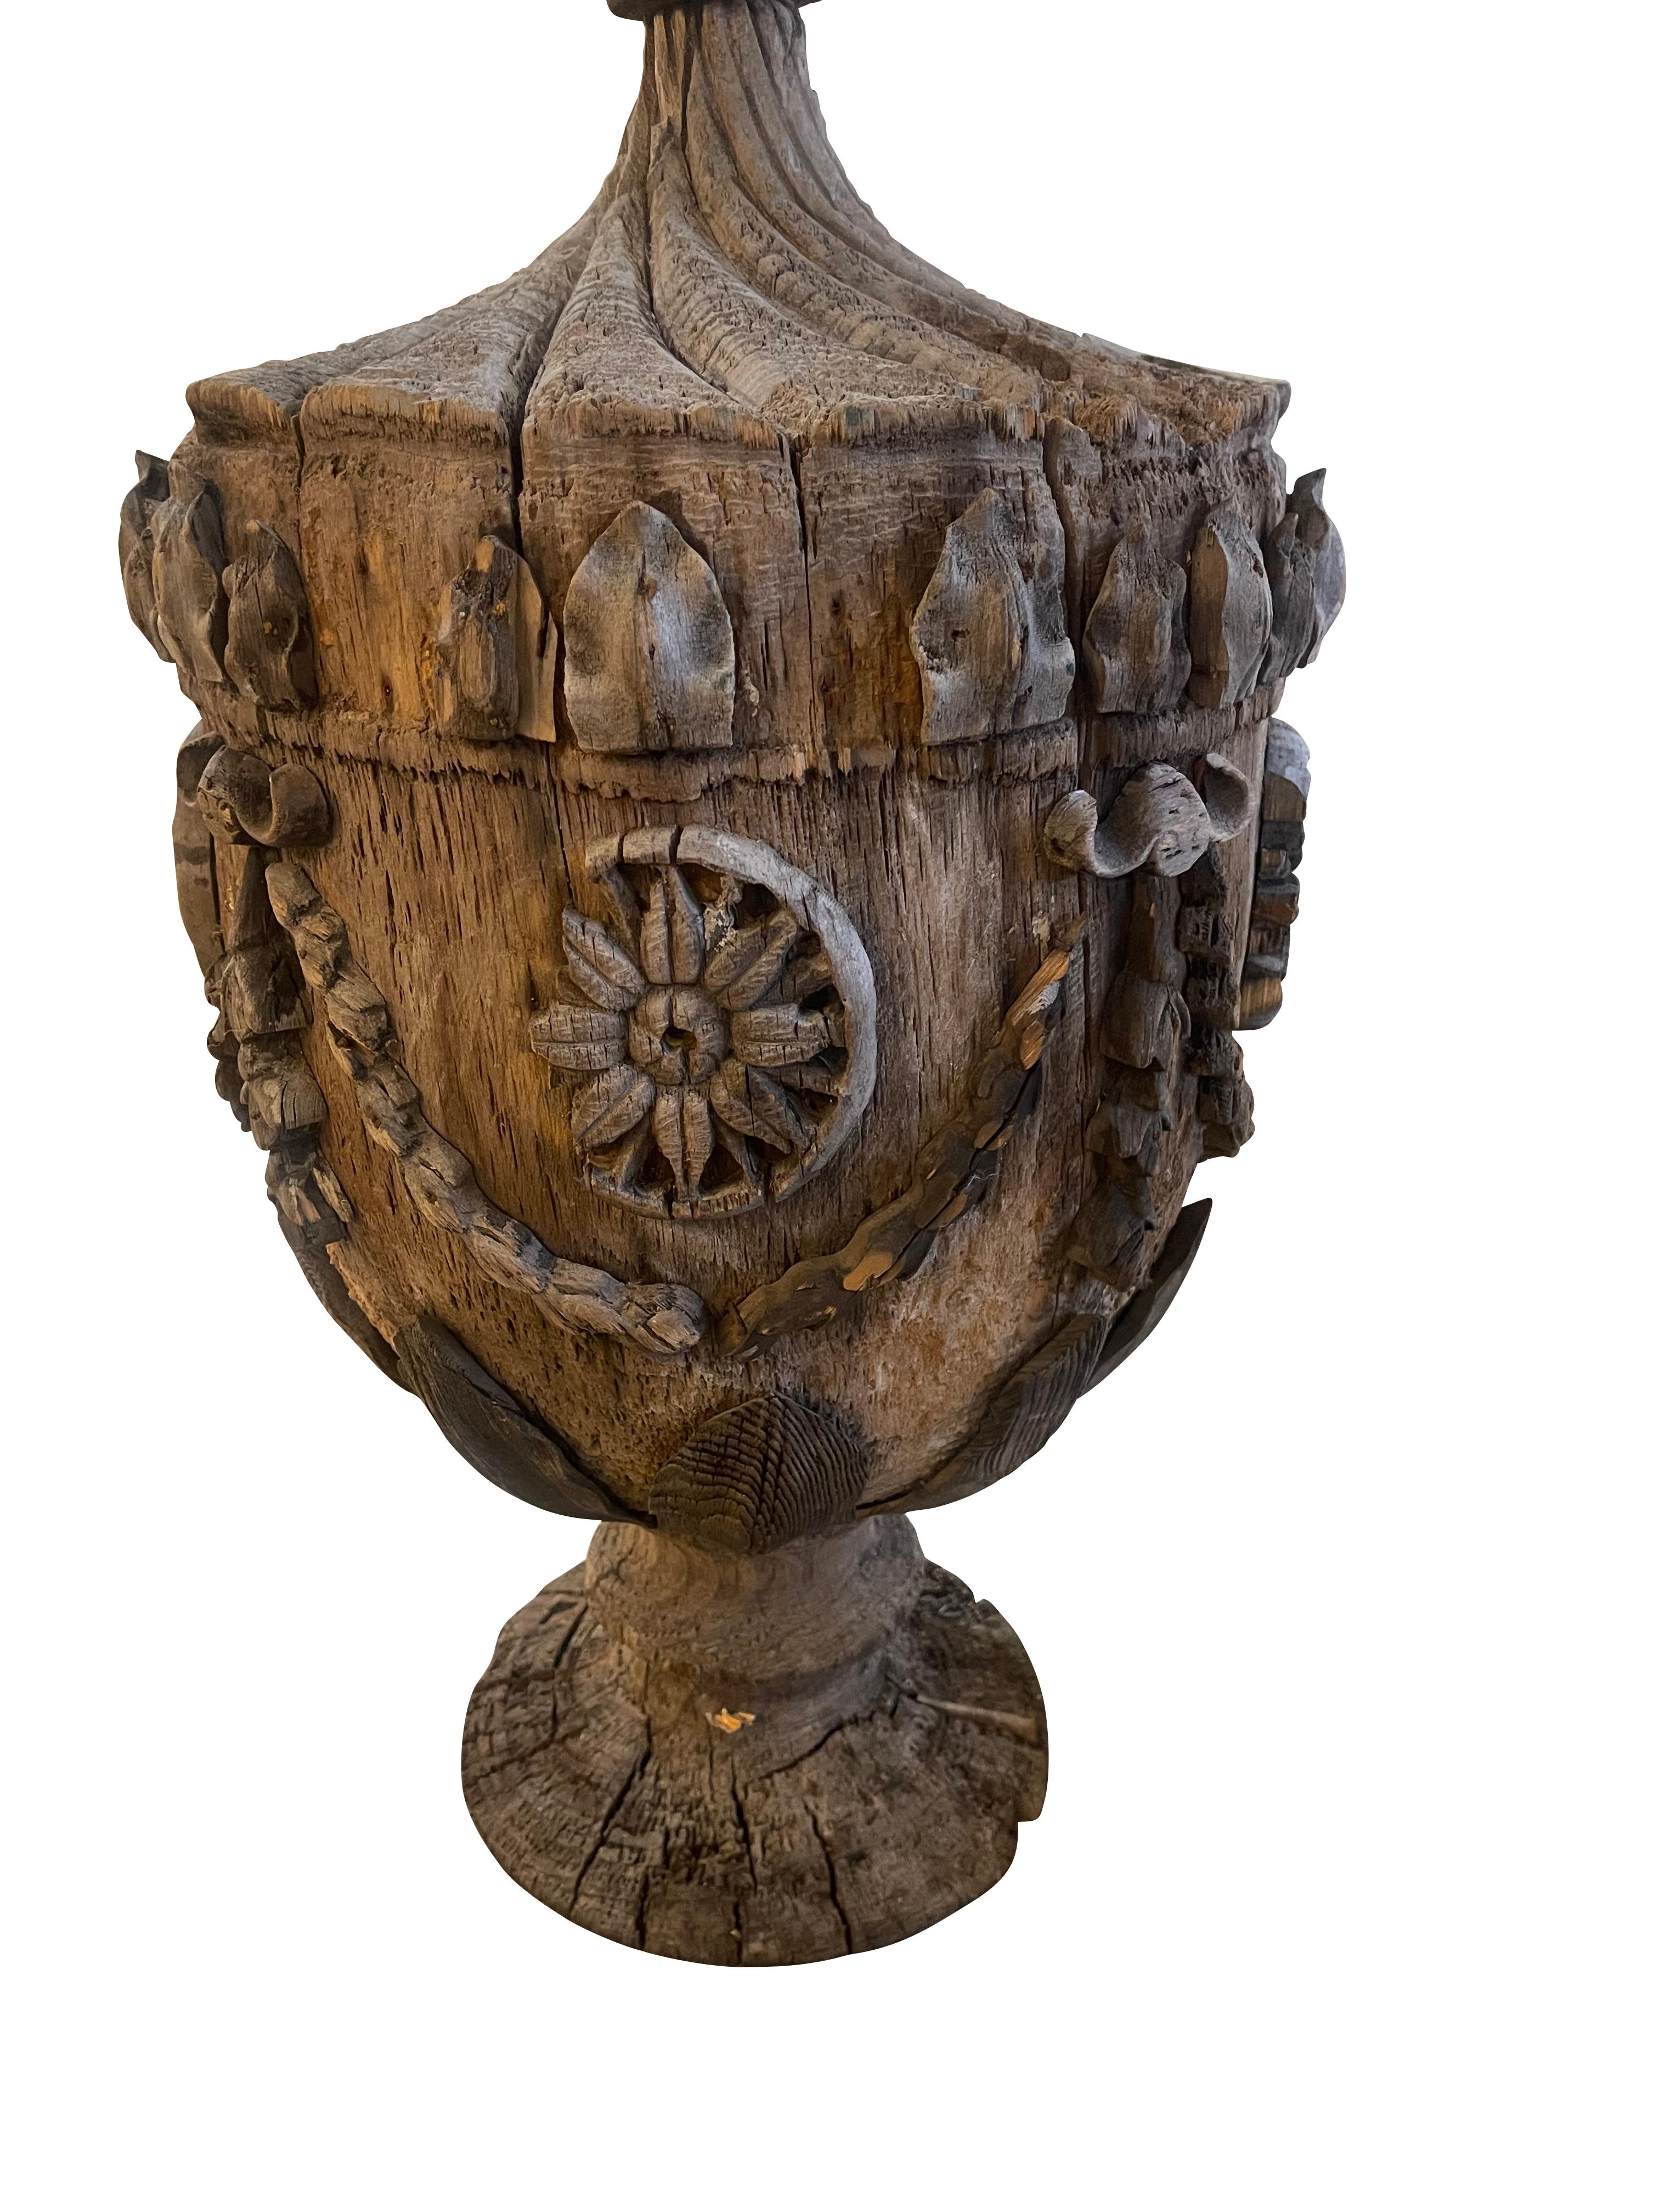 Hand carved and crfated 30 inch high wooden garden finial decorated with neoclassical garlands, foliate designs and decorative carvings.  this is truly a spectacular piece for a garden room, greenhouse or outdoor patio.  The surface of the fial has